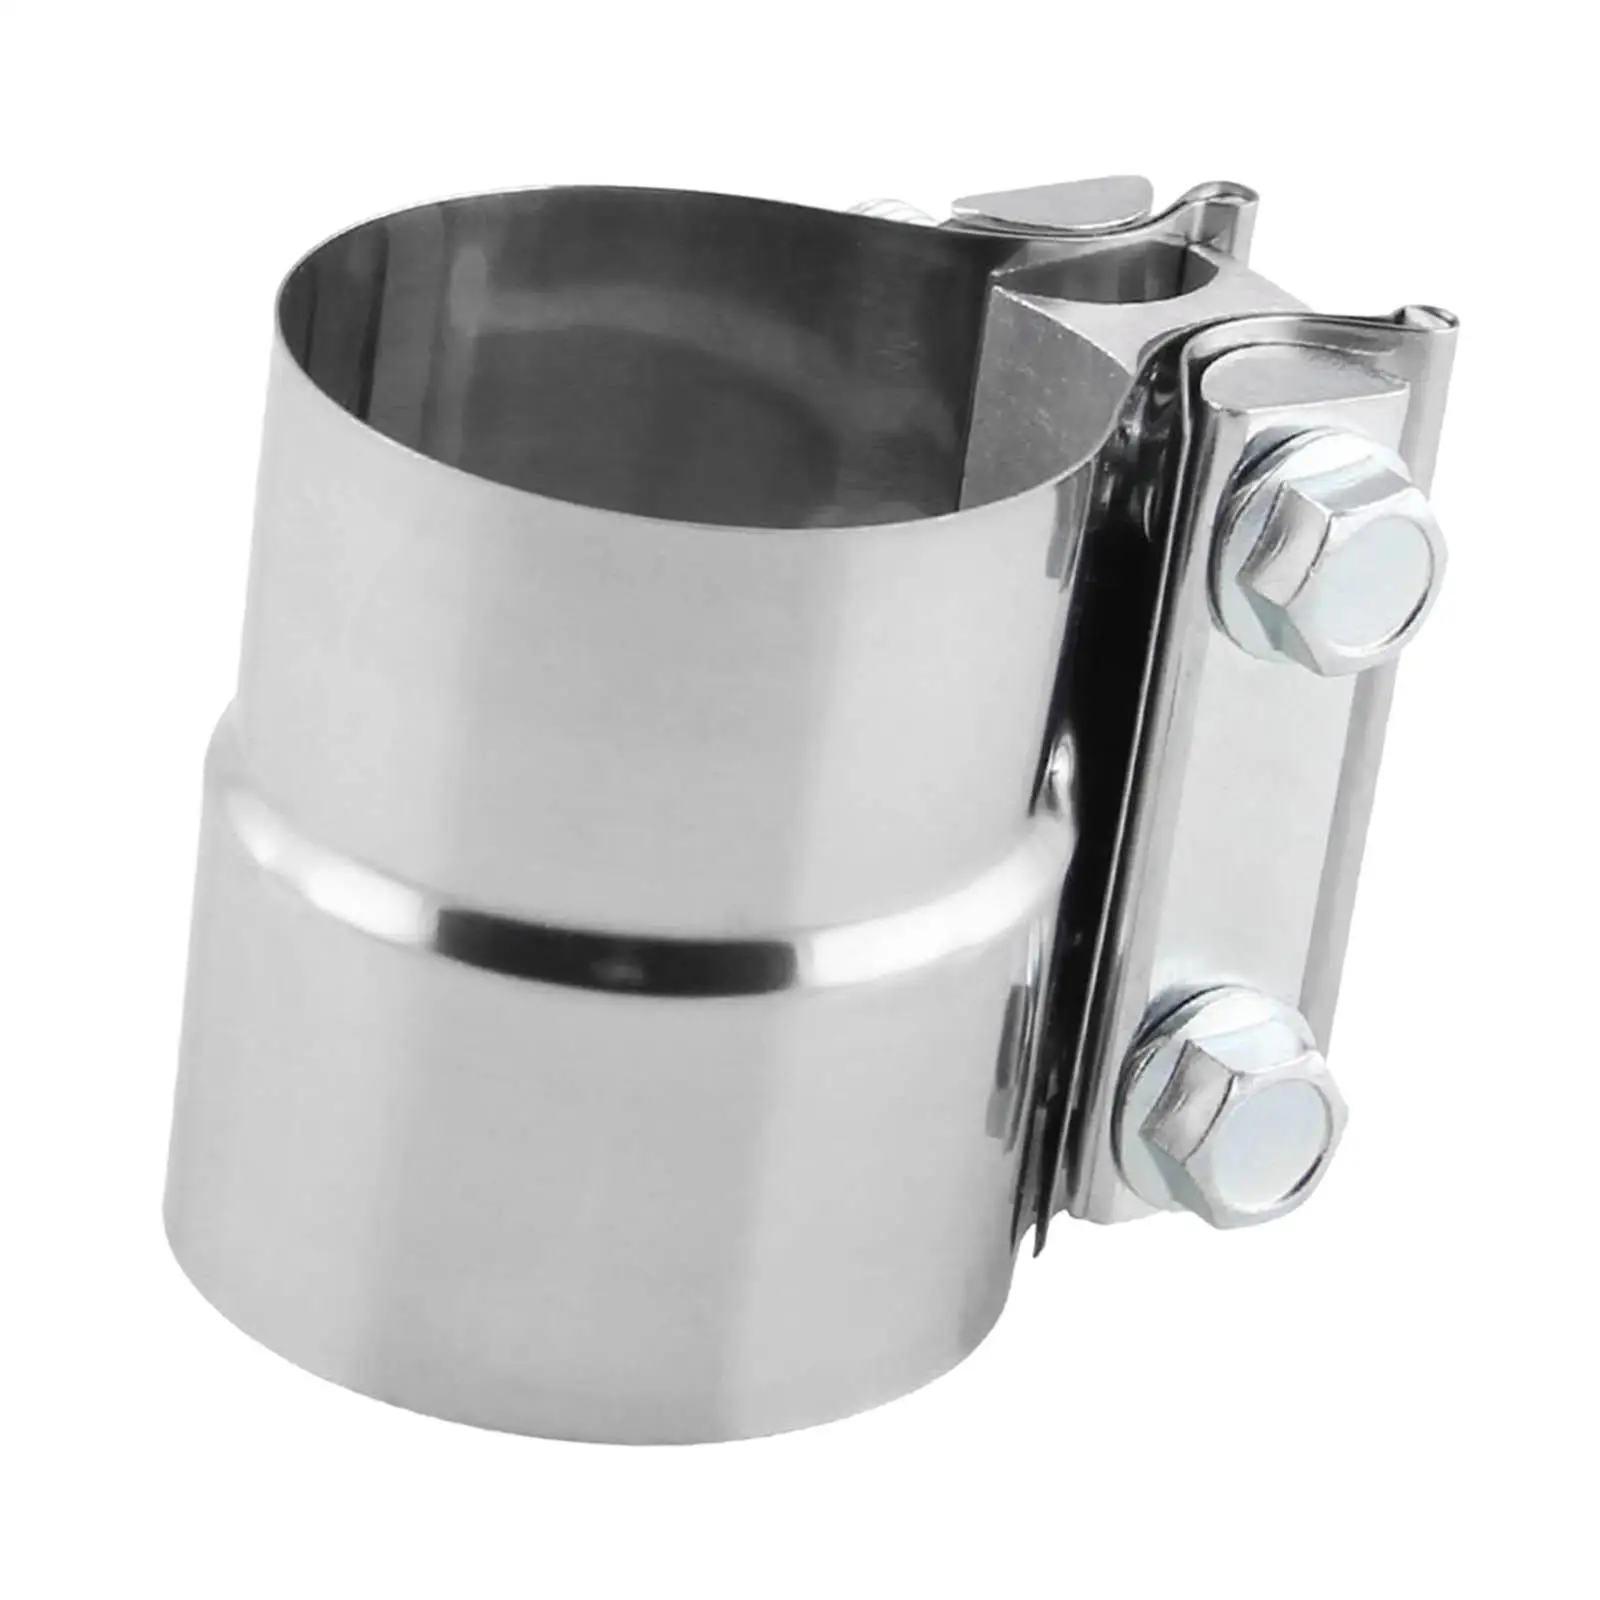 2inch Exhaust  Band Clamp Lap Joint Down Sleeve Band, Exhaust Tail  Stainless Steel  Catback Car Tail  